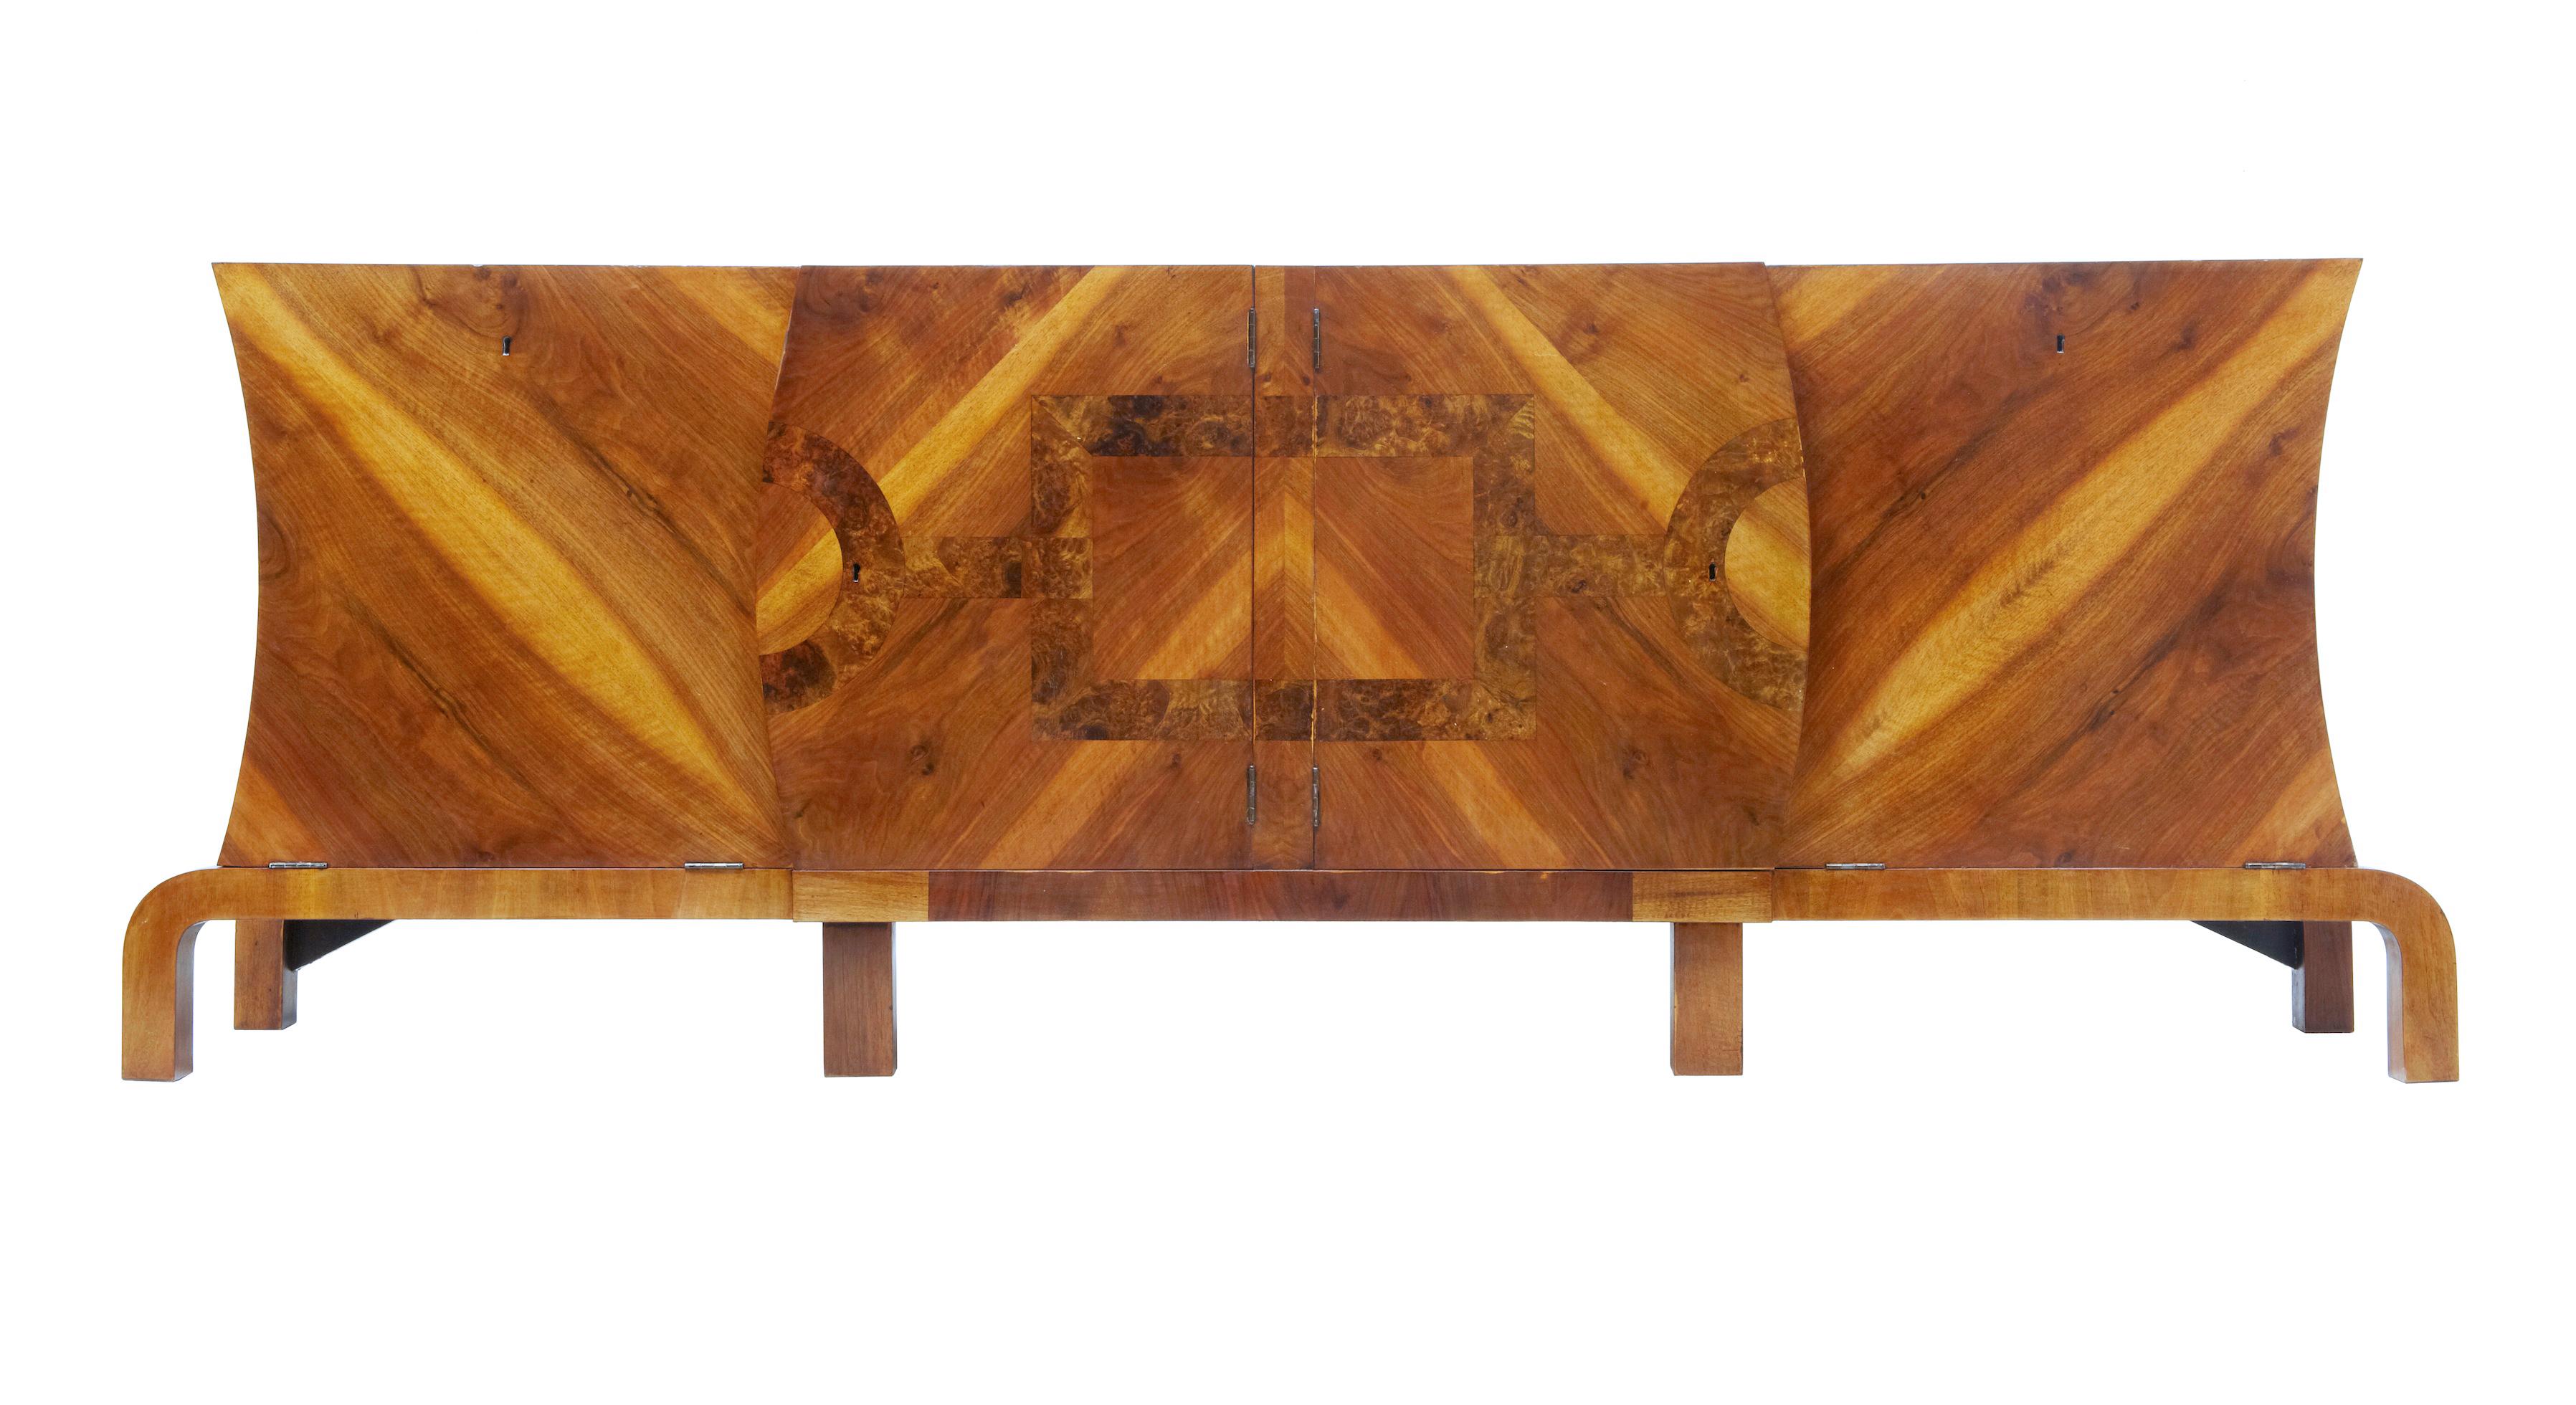 Large Art Deco walnut and burr inlaid sideboard, circa 1930.

Imposing Art Deco sideboard of large proportions, circa 1930. Beautiful veneered in walnut and beautifully crossbanded in burr walnut. 2 central doors that open to a single shelf in